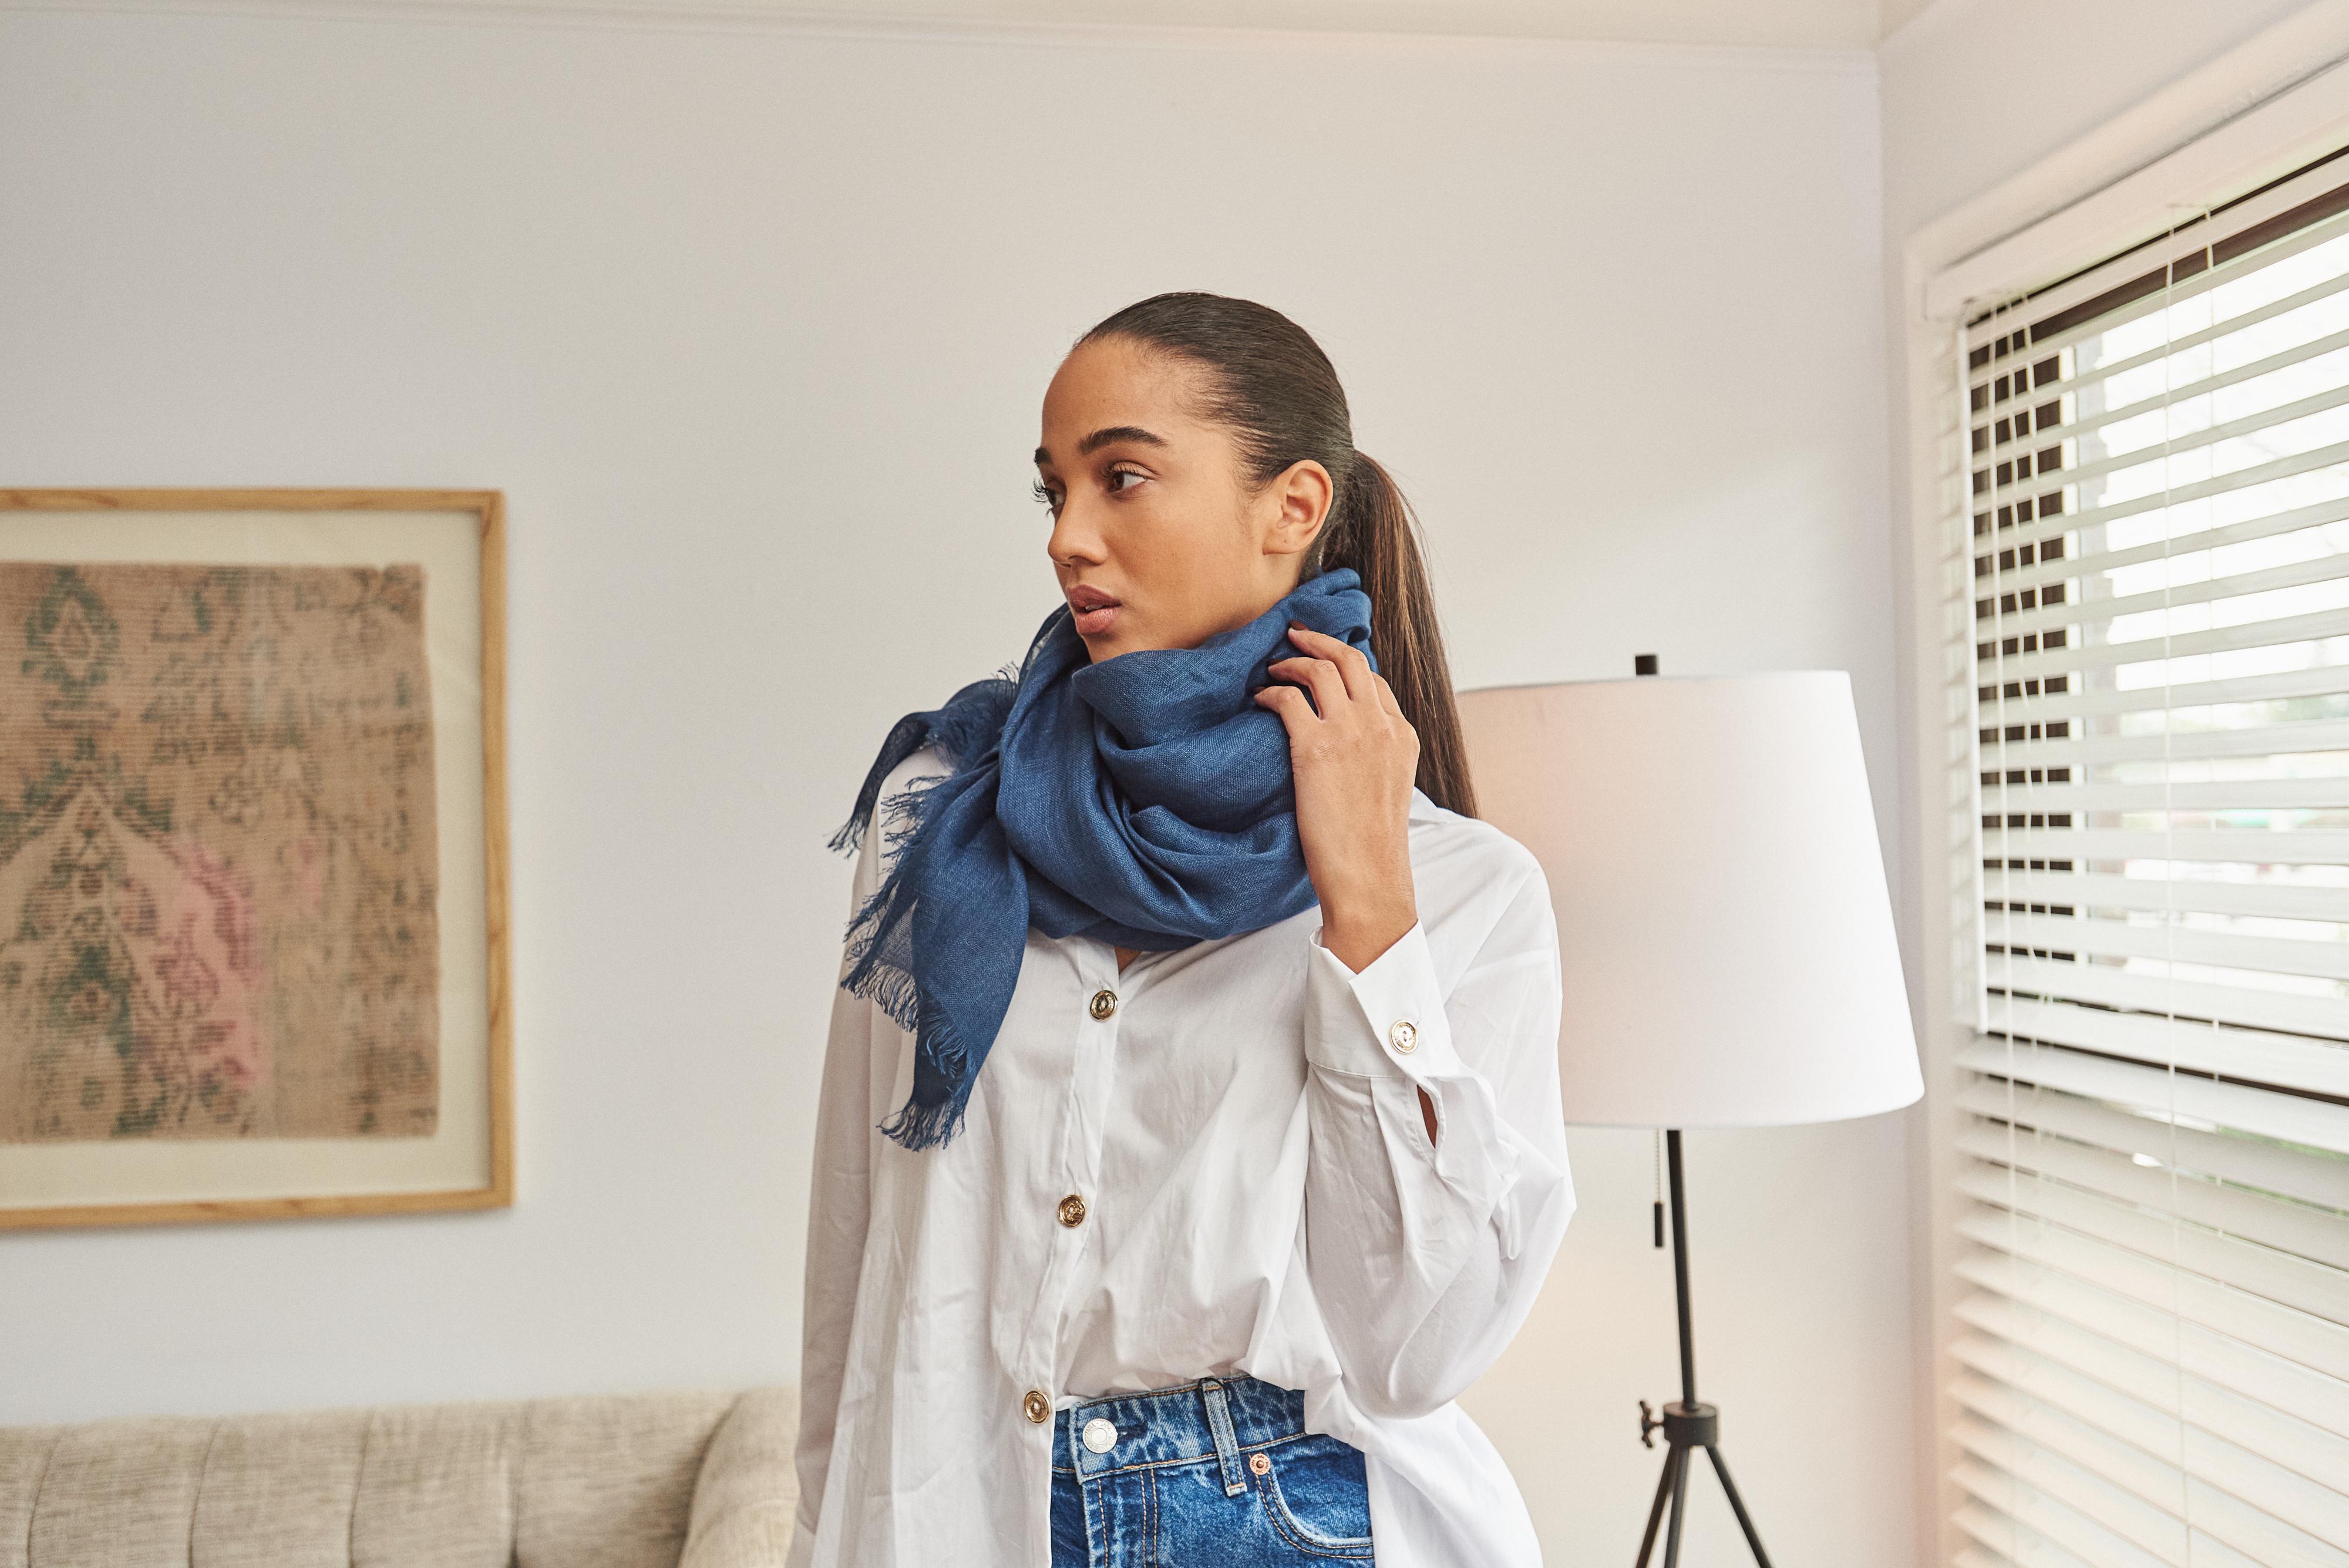 Custom design by Studio Variously, Midnight Blue is a light weight linen scarf. It is finely handwoven by master artisans in Nepal.  

A sustainable design brand based out of Michigan, Studio Variously exclusively collaborates with artisan